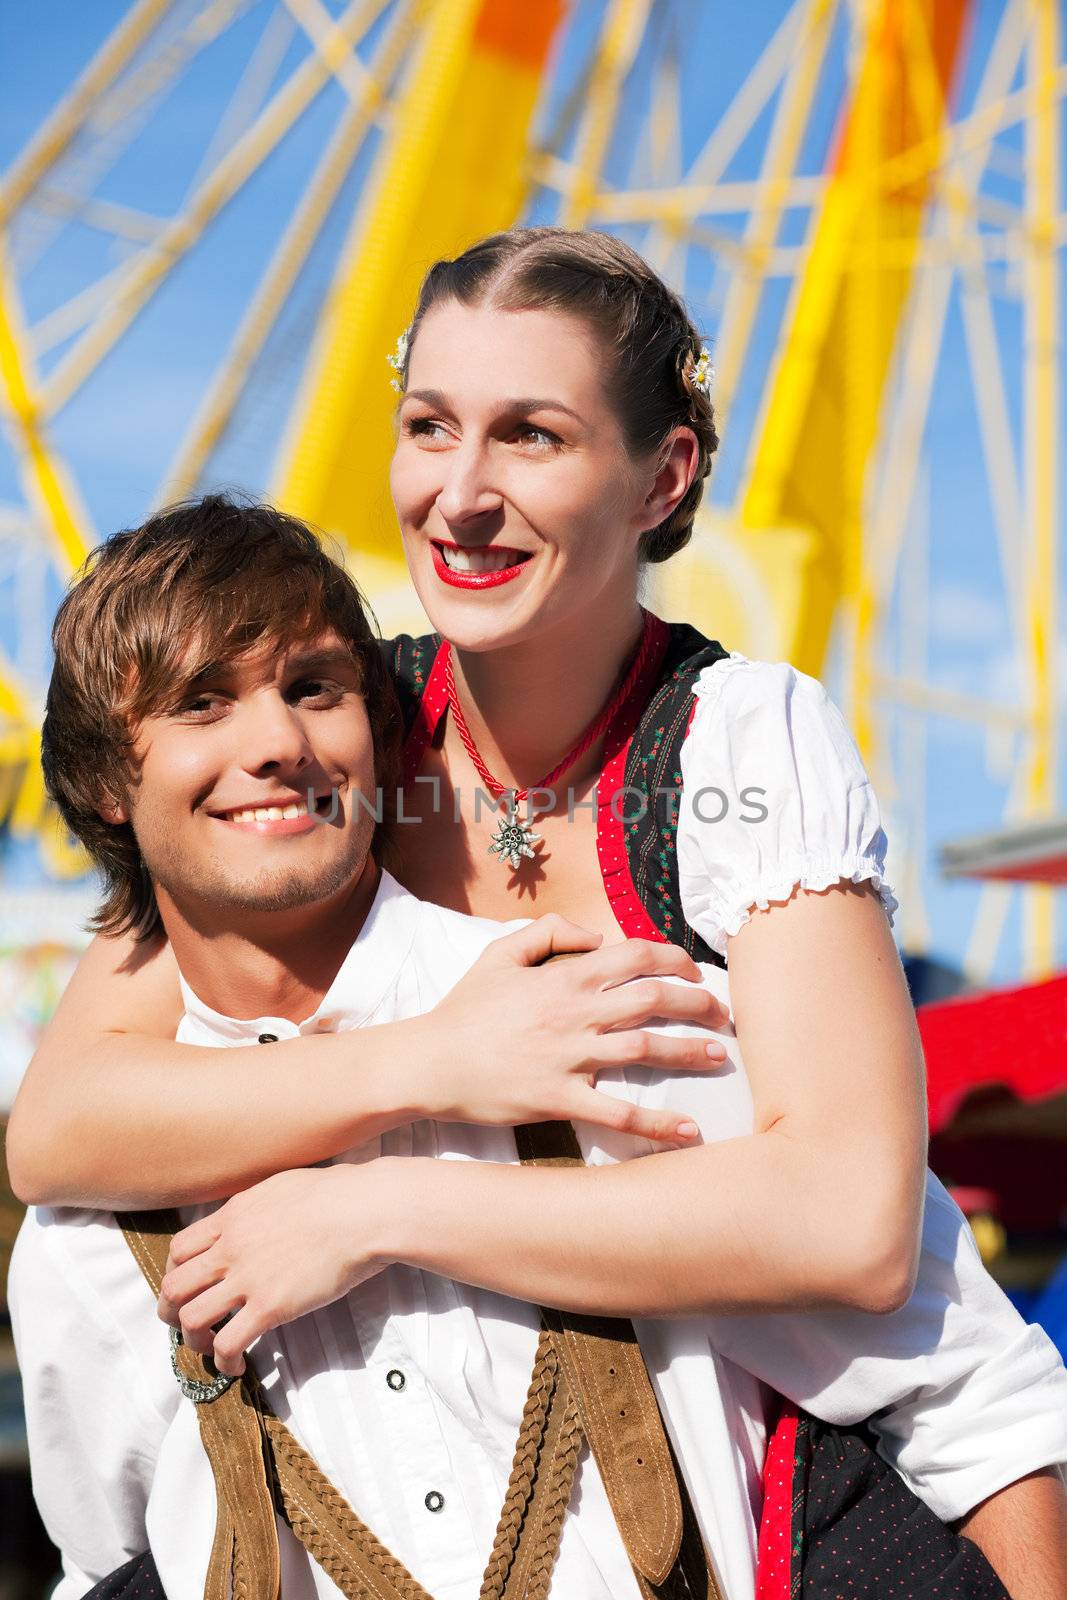 Couple in Tracht flirting at big wheel by Kzenon